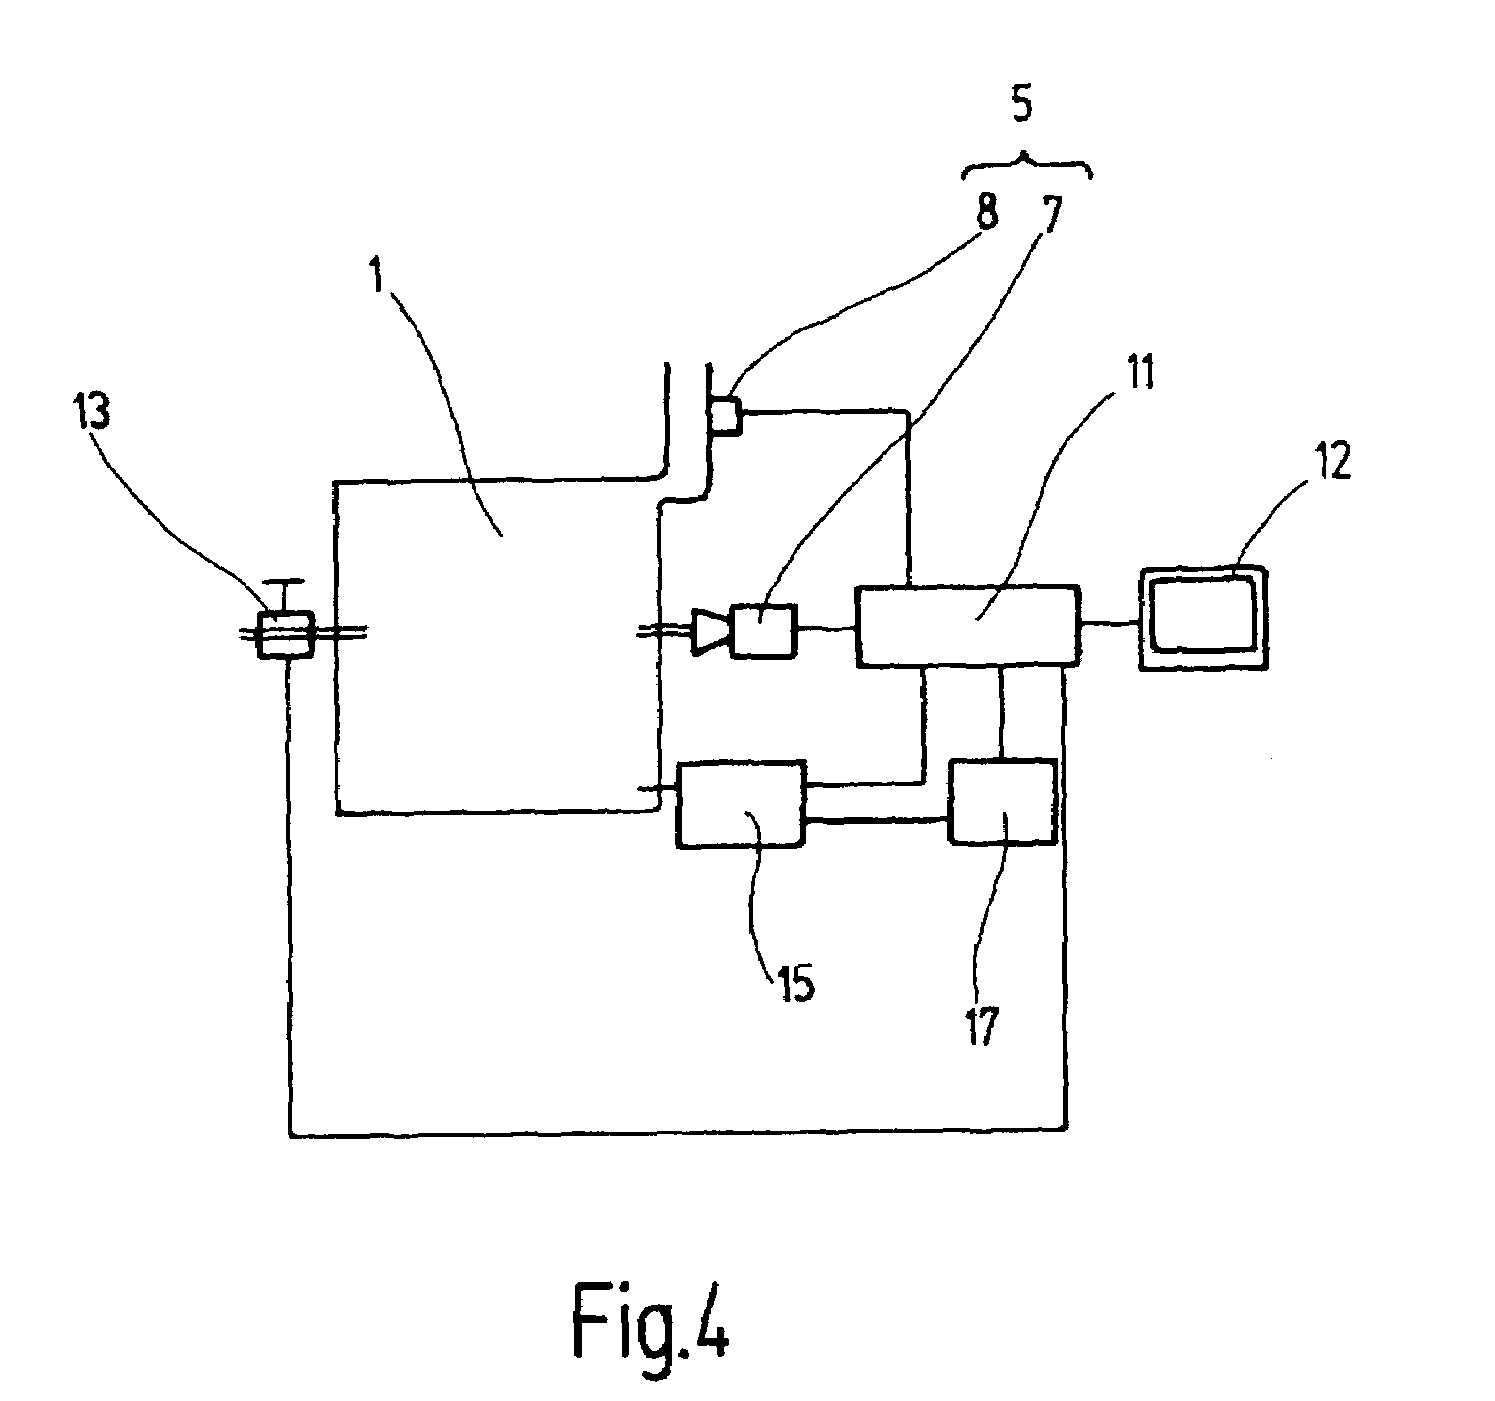 Method for controlling a thermodynamic process, in particular a combustion process